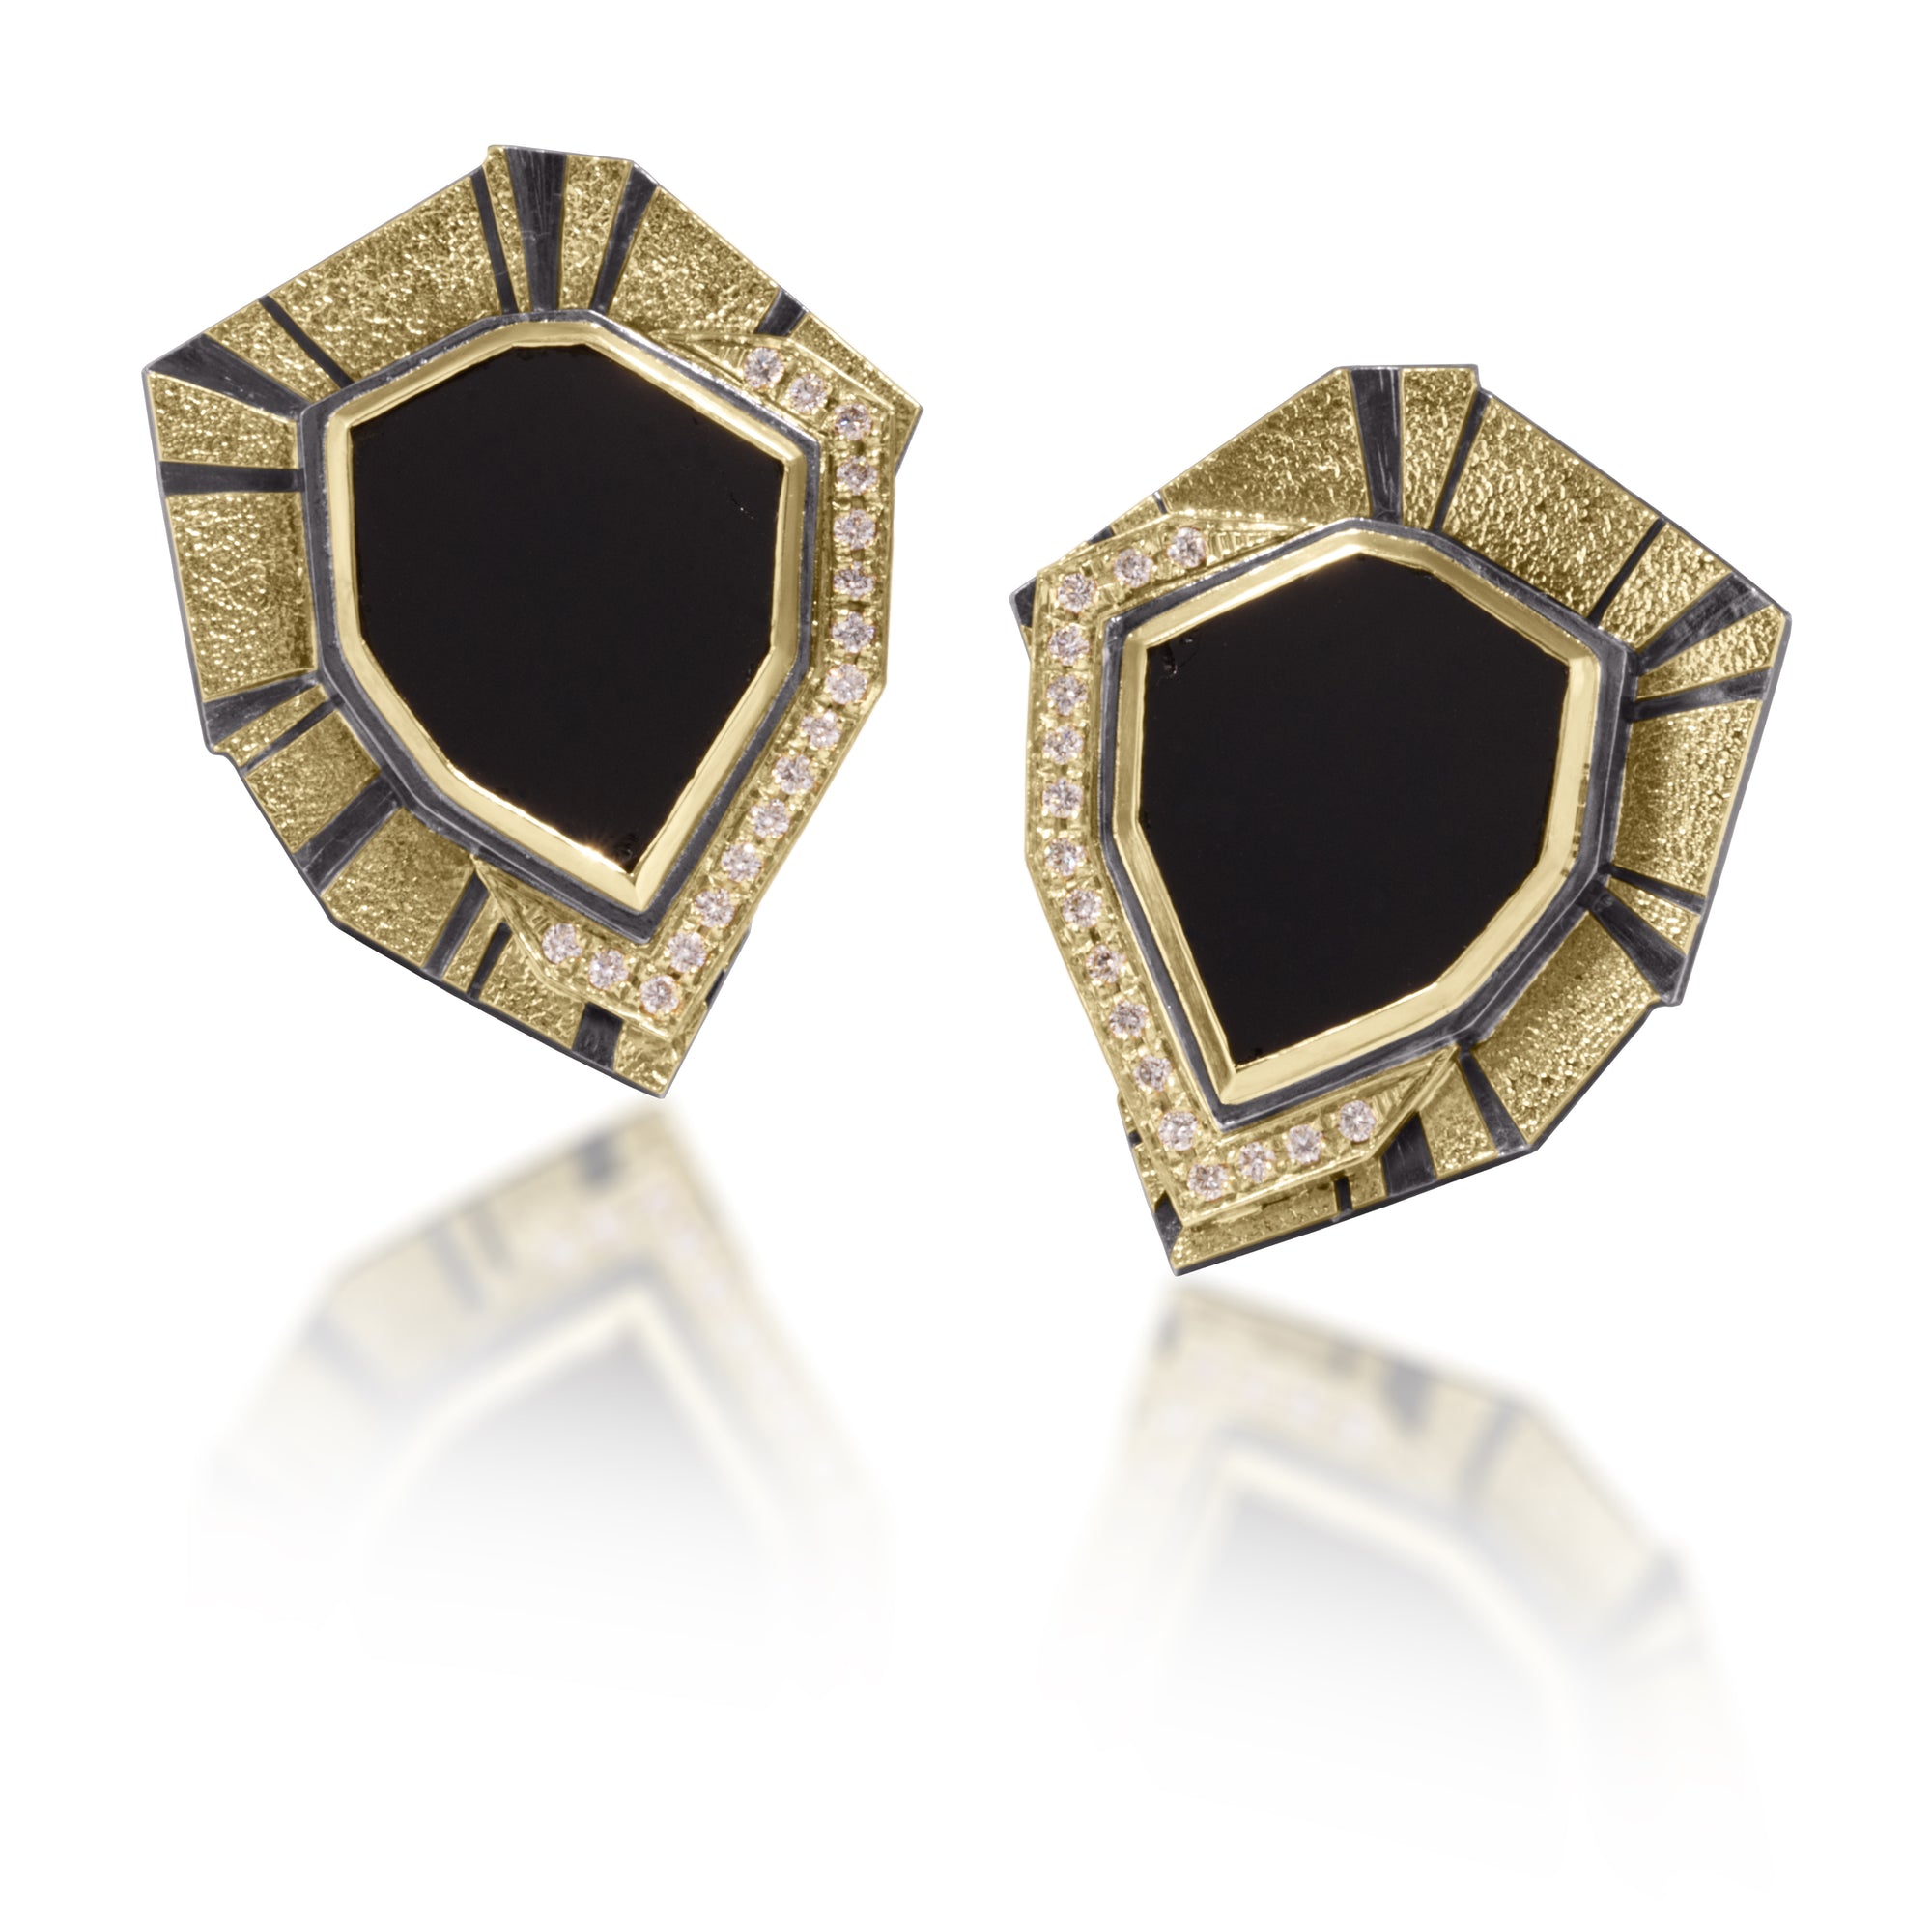 One of a kind Stripe Earring E-2003 in 18k gold and oxidized sterling silver with bezel set, black tourmaline natural crystal slice. Hand fabricated, stipple textured and engraved mixed metals. Bright cut pave set white diamonds, .240 tcw., 14k gold posts and oxidized sterling lever backs.